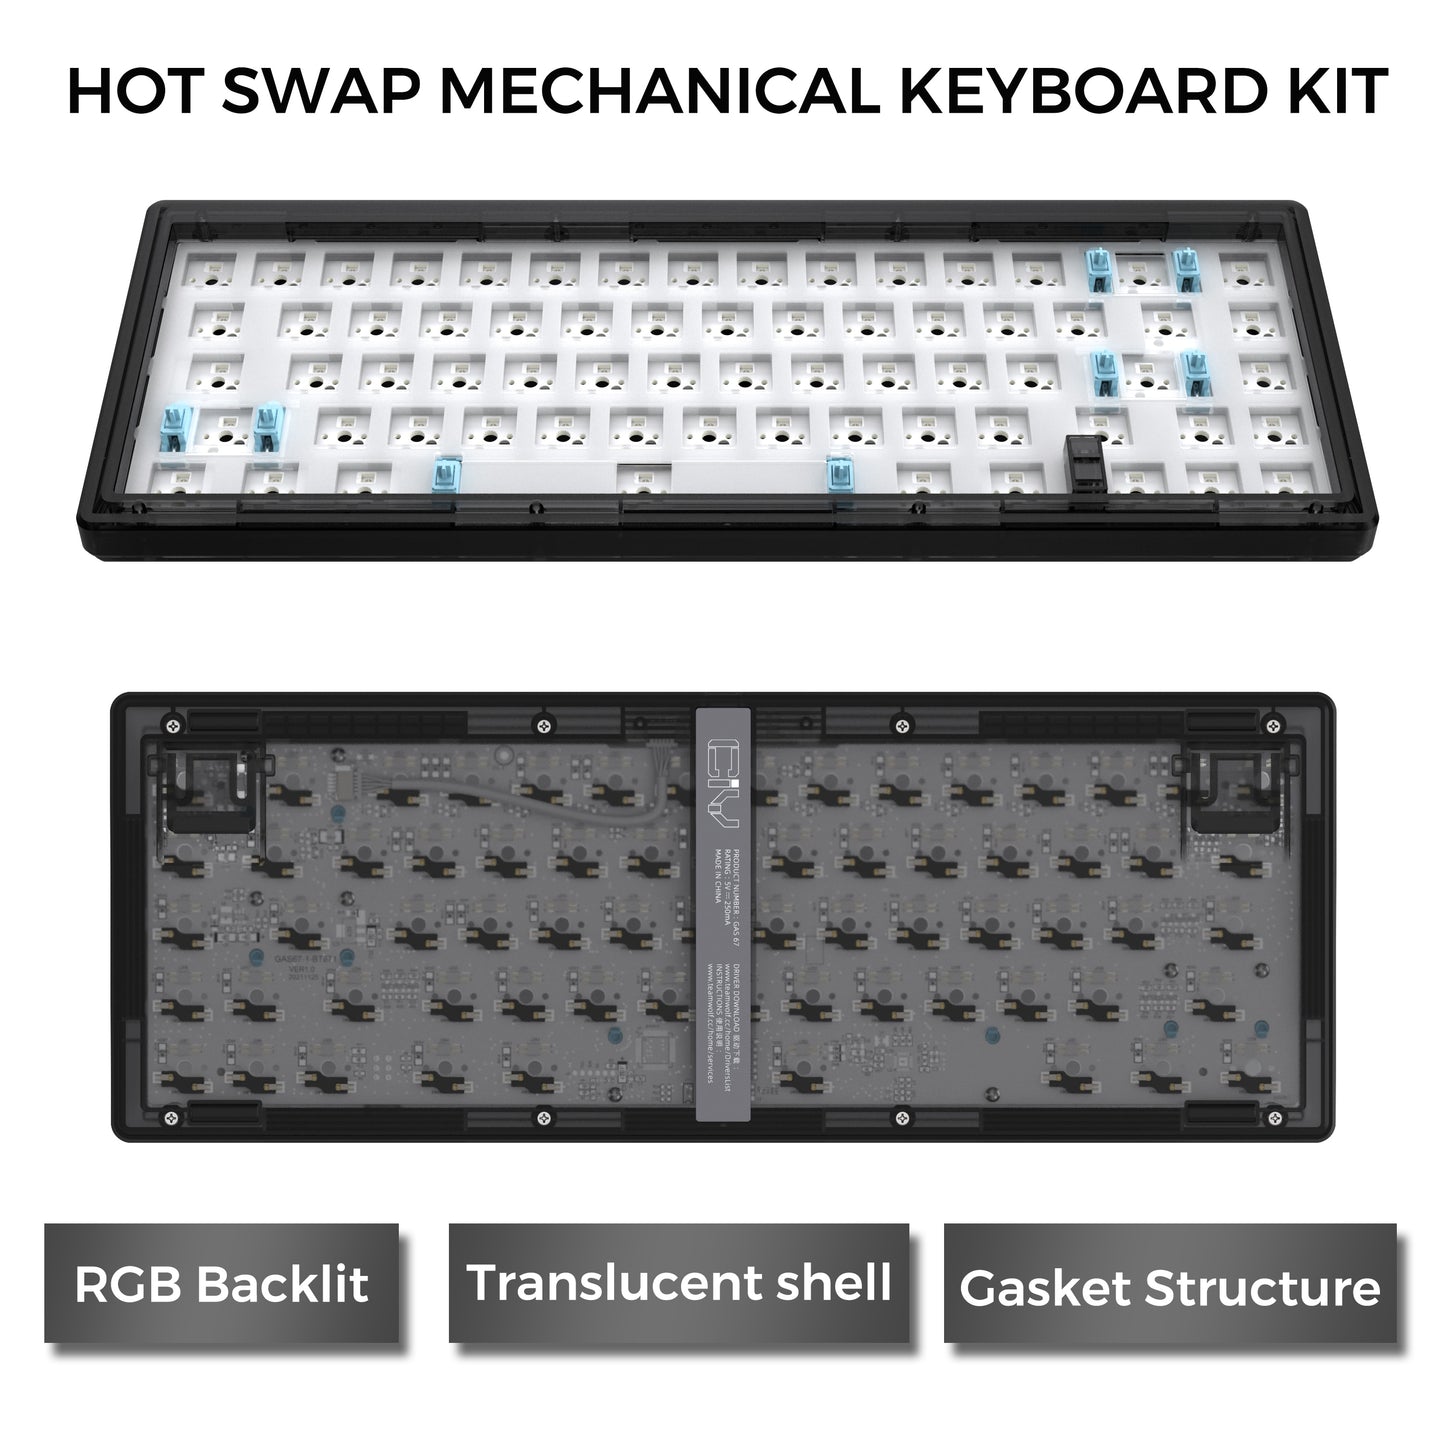 GAS67 Hot Swap Customized Mechanical Keyboard Kit Gasket Structure Type-C RGB Compatiable With 3/5 Pins For Cherry Gateron Kailh